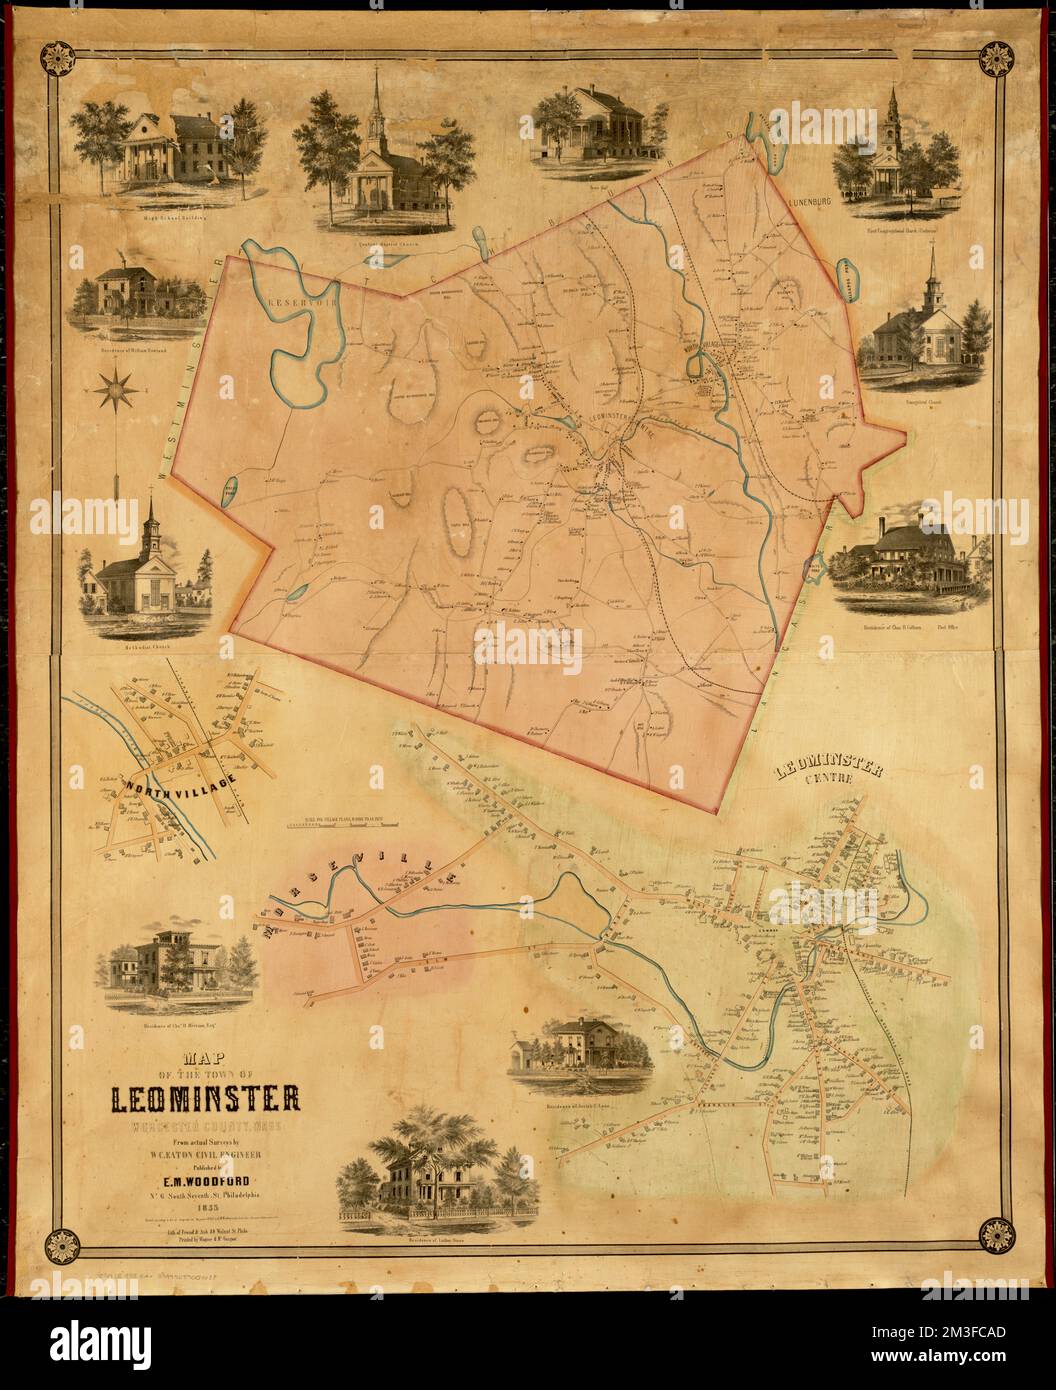 Map of the town of Leominster : Worcester County, Mass , Landowners, Massachusetts, Leominster, Maps, Leominster Mass., Maps Norman B. Leventhal Map Center Collection Stock Photo